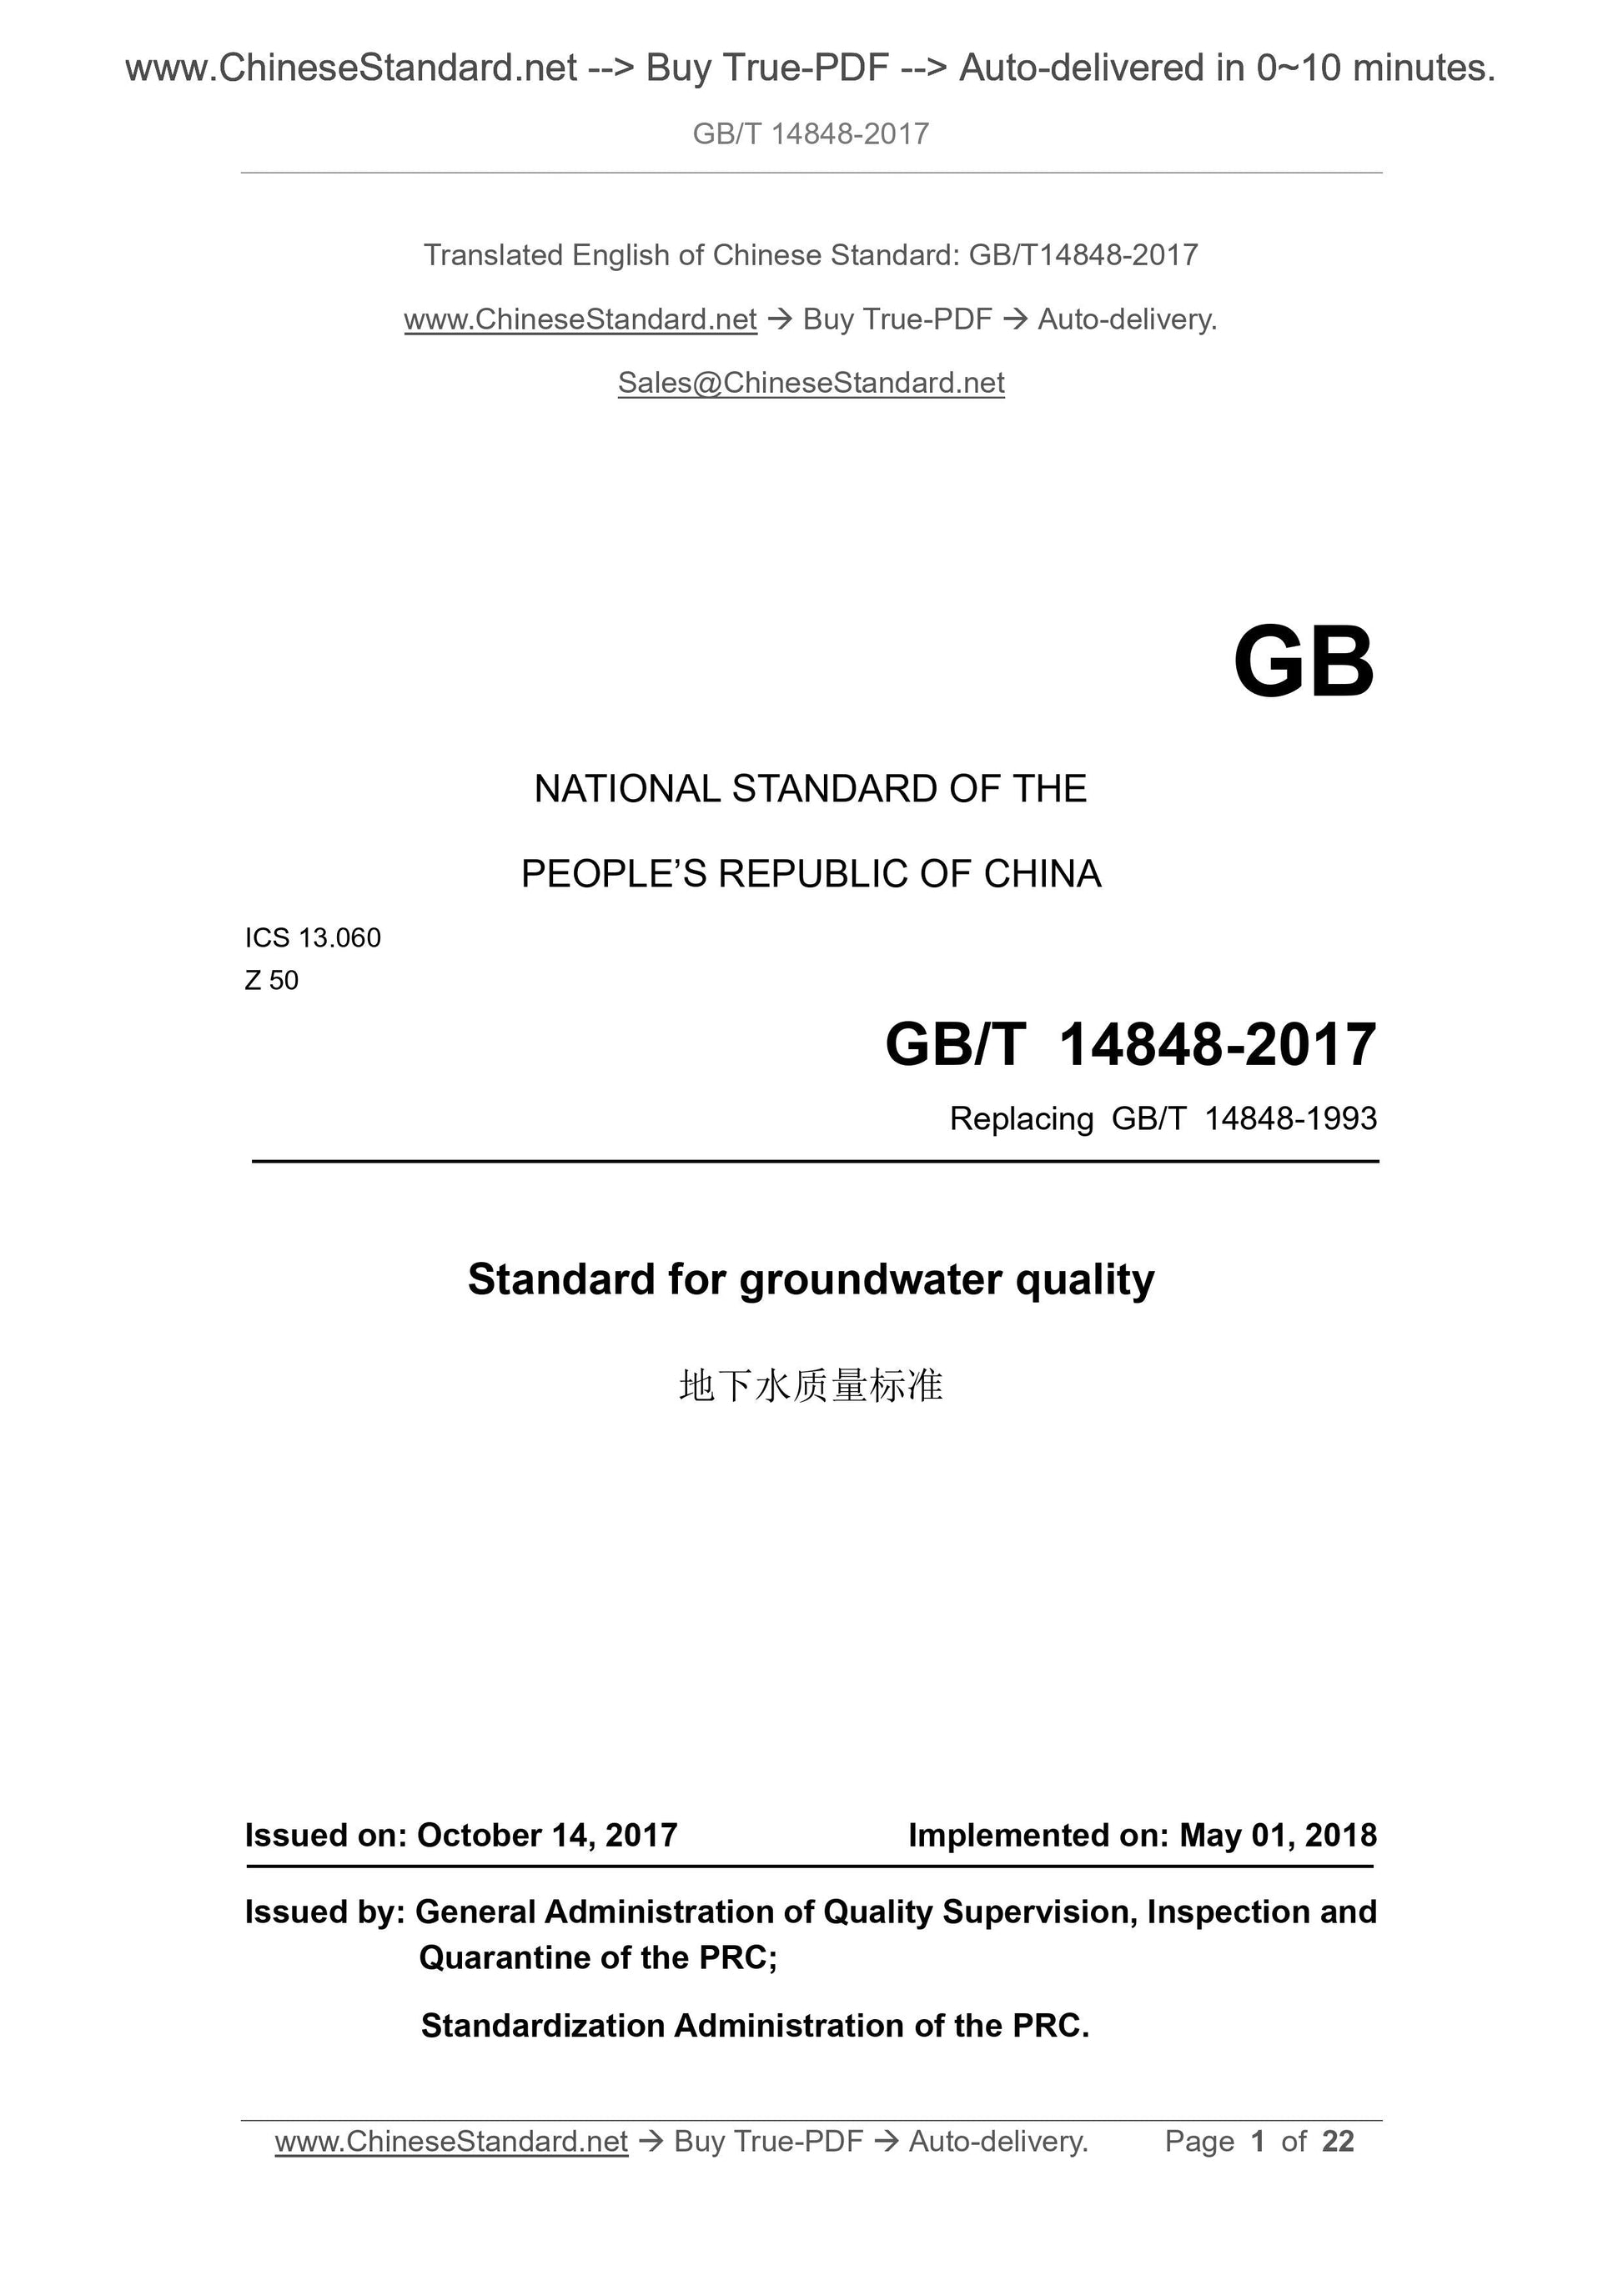 GB/T 14848-2017 Page 1